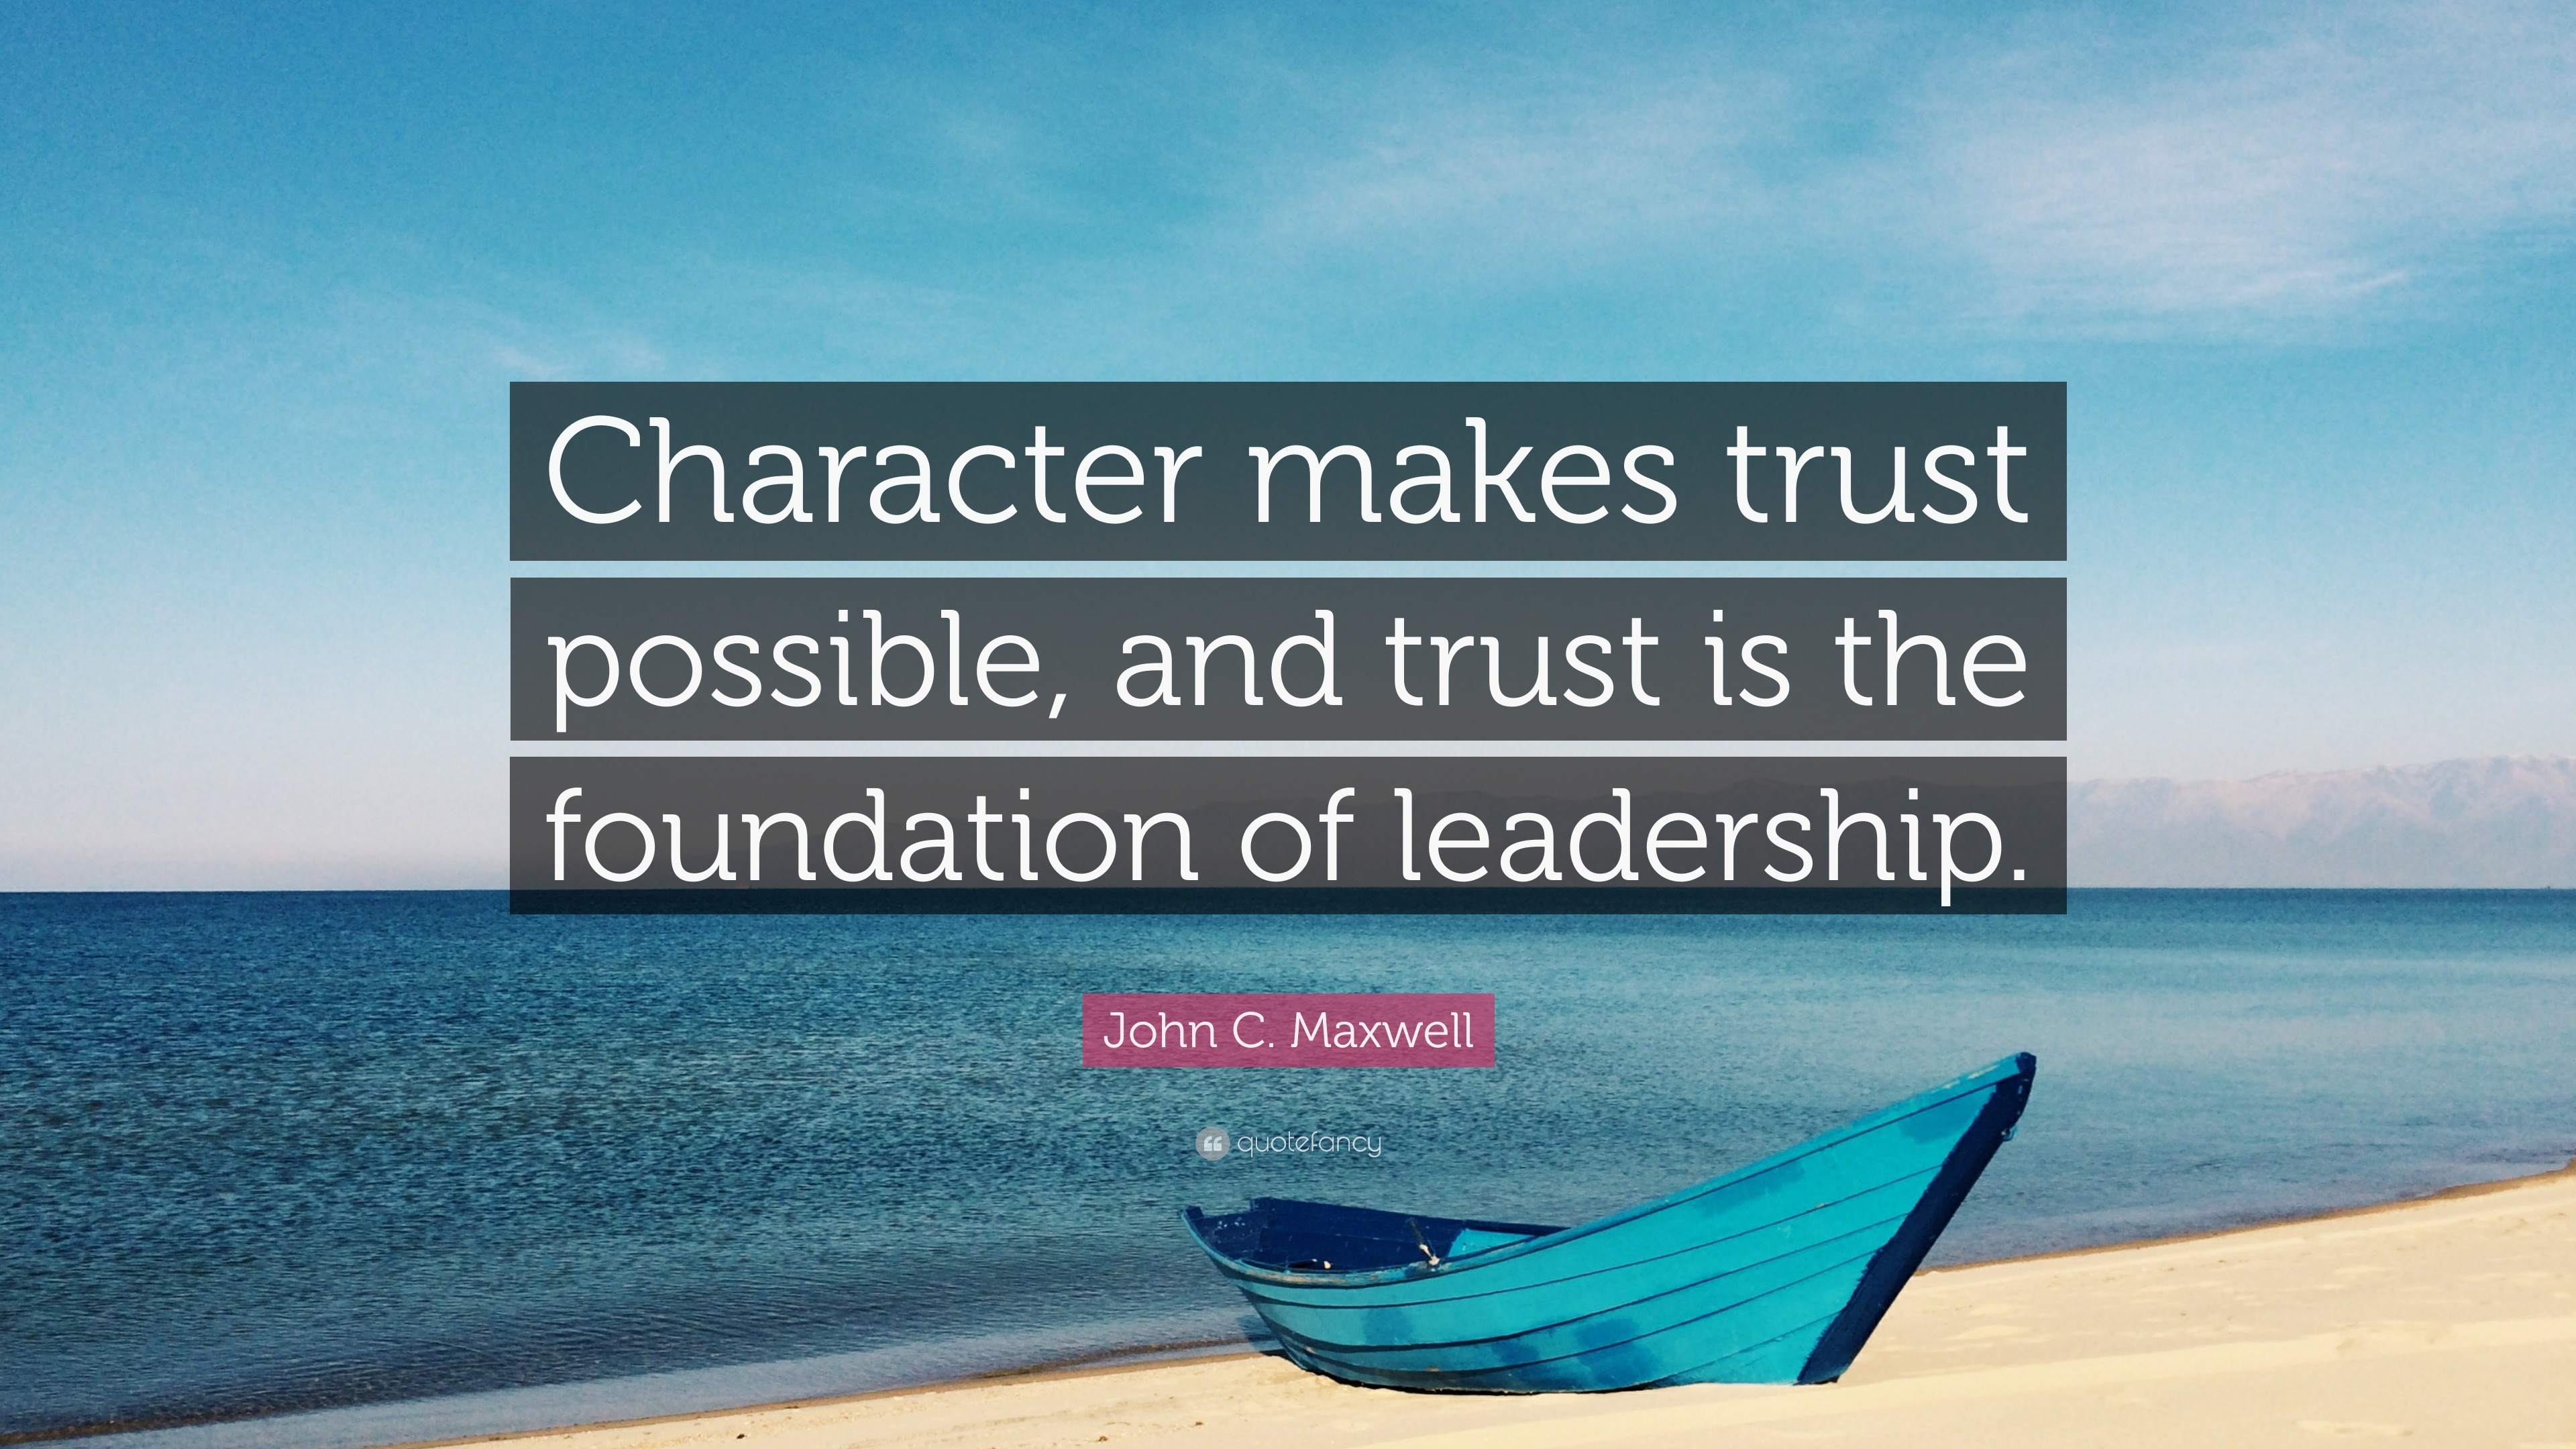 John C. Maxwell Quote: “Character makes trust possible, and trust is